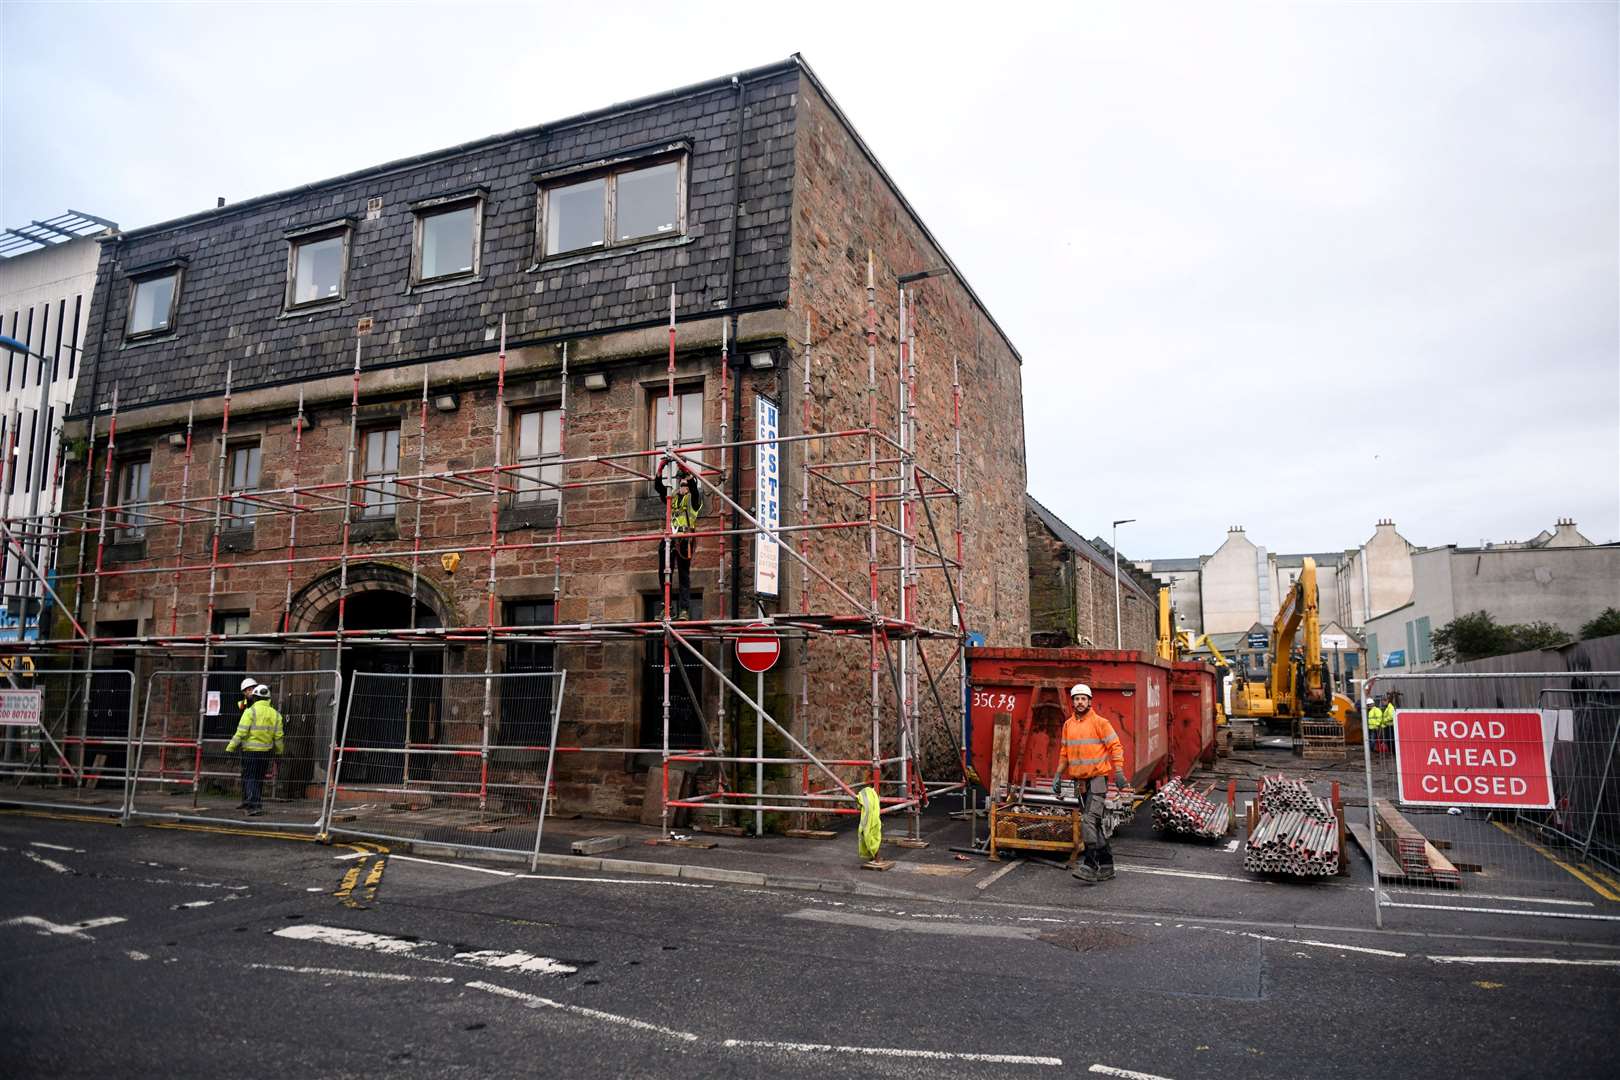 A backpackers hostel in the building did not reopen after the coronavirus pandemic. Picture: James Mackenzie